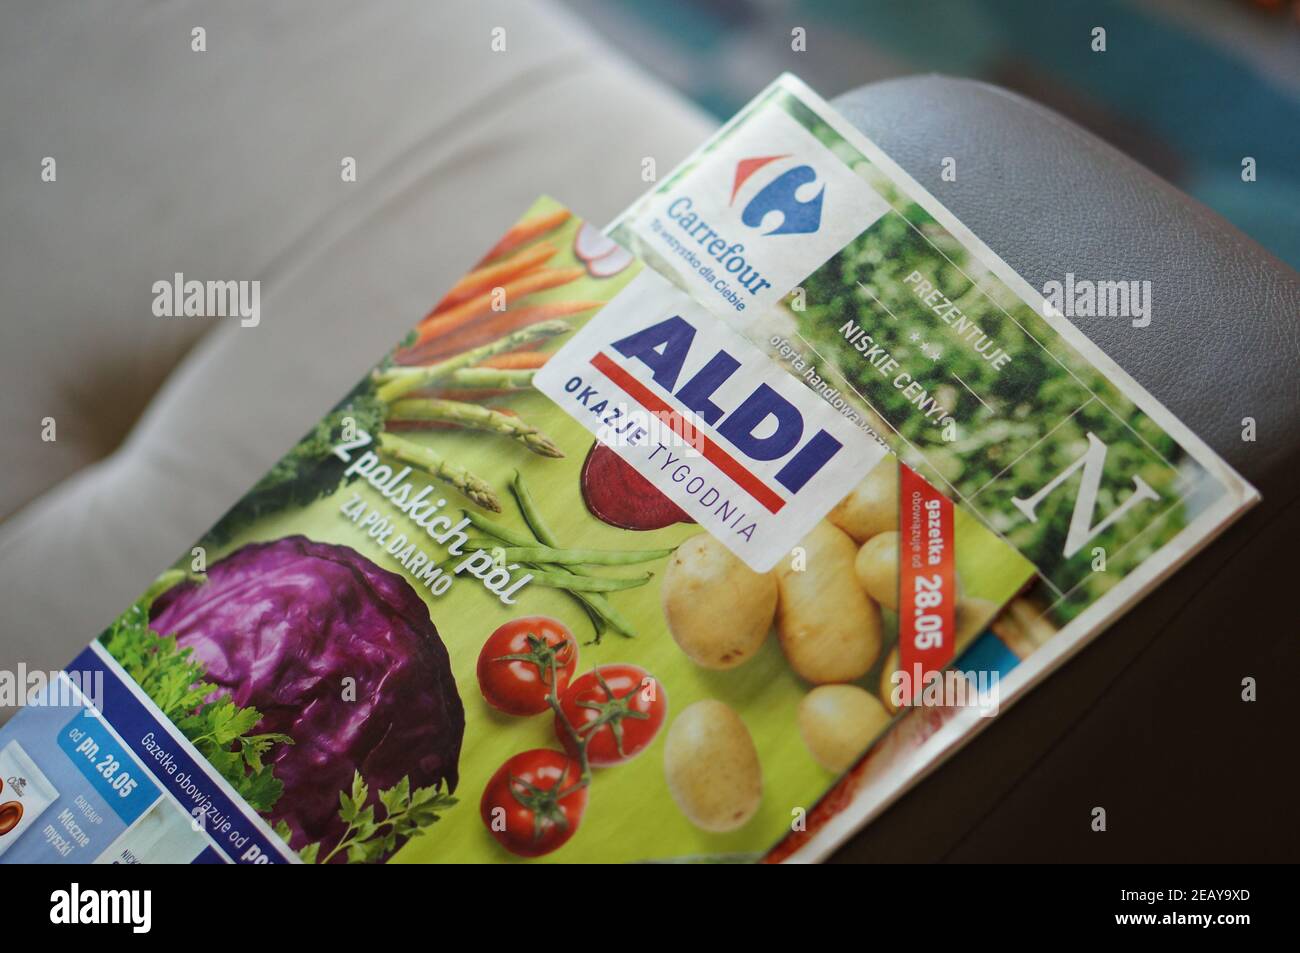 POZNAN, POLAND - May 28, 2018: Carrefour and Aldi supermarket brochures  laying on a sofa Stock Photo - Alamy